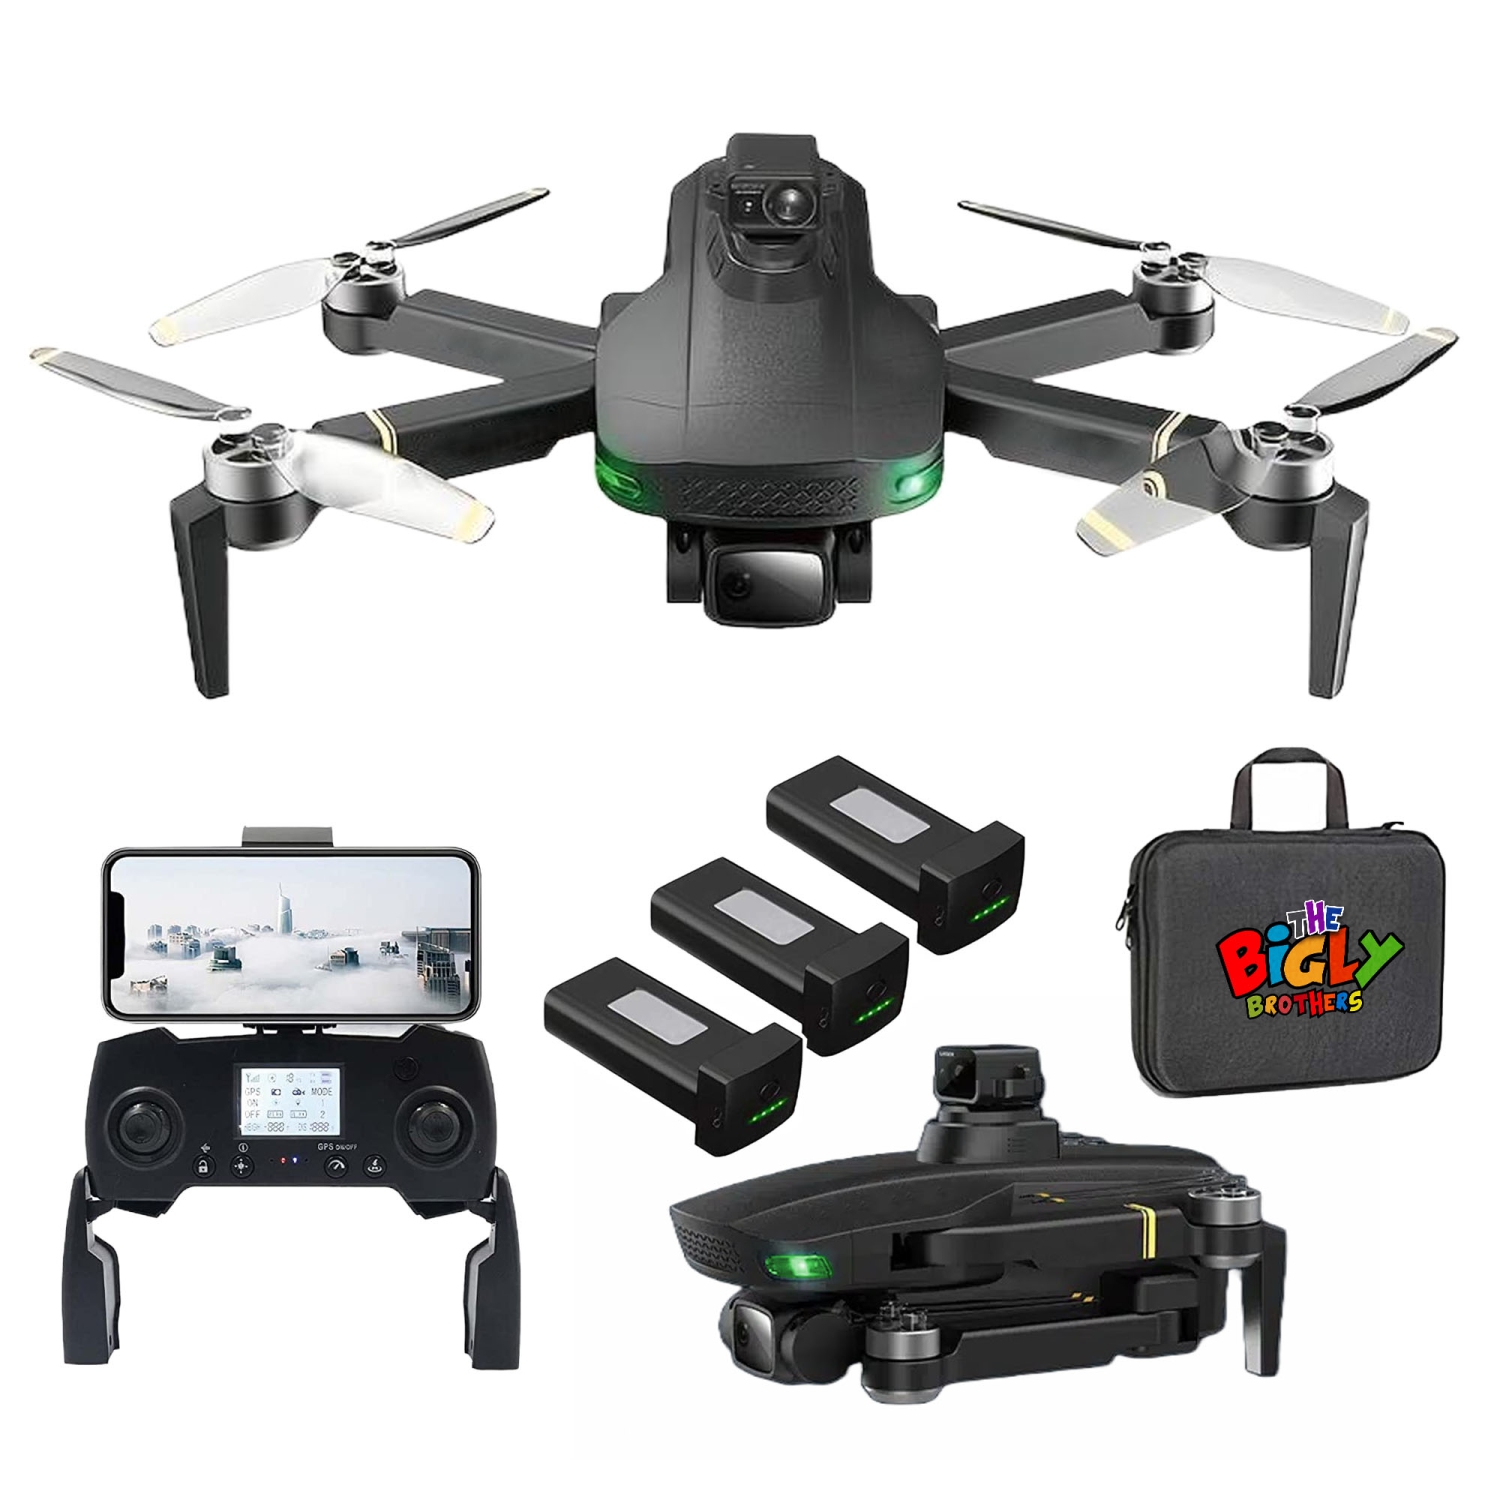 The Bigly Brothers GD93 Midnight Specter GPS Drone, 720 Degrees Obstacle Avoidance, Smart Return home, 4K Camera 1000m Range, 60mins Flight Time Below 249g, carrying case included